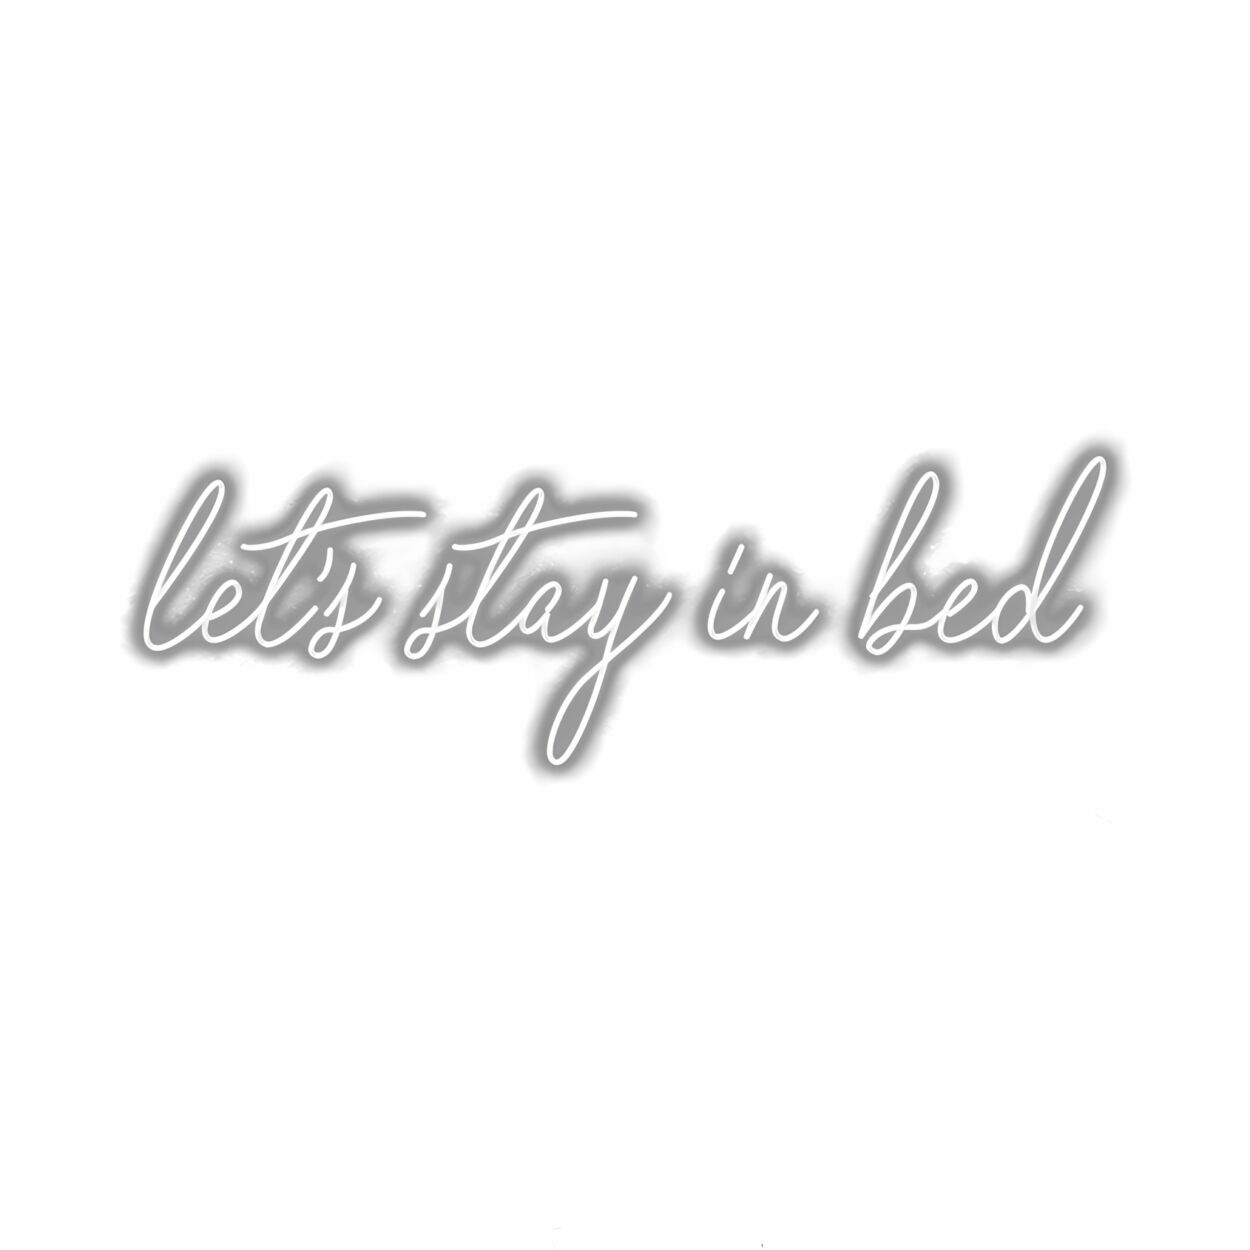 Text 'let's stay in bed' with shadow effect